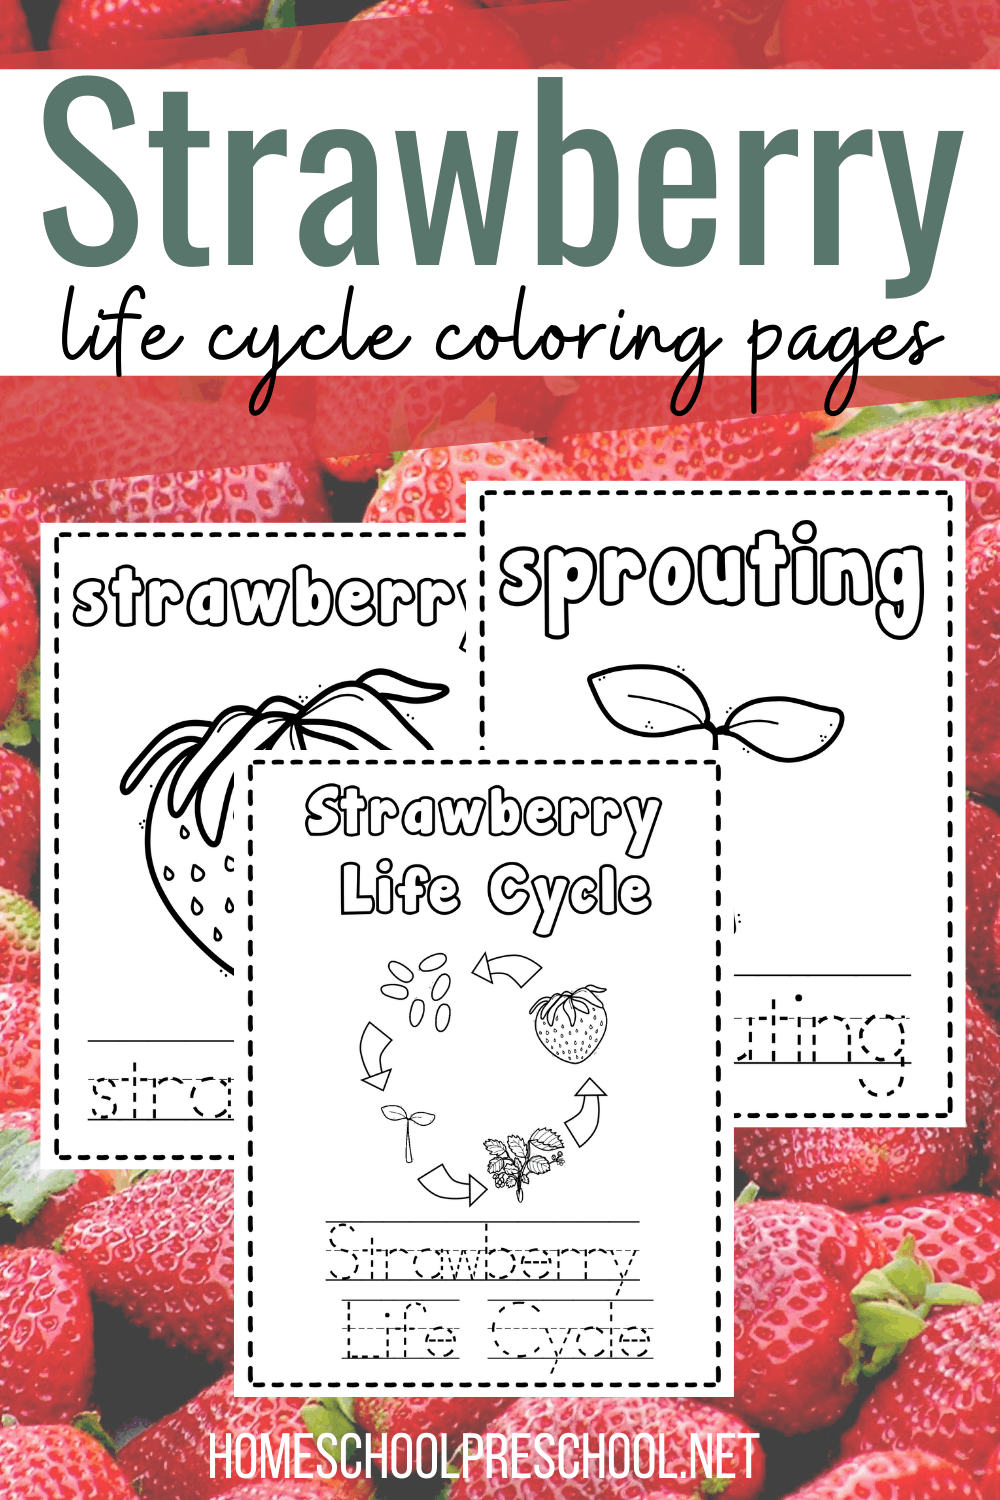 strawberry-lc-coloring-1 Life Cycle of a Strawberry